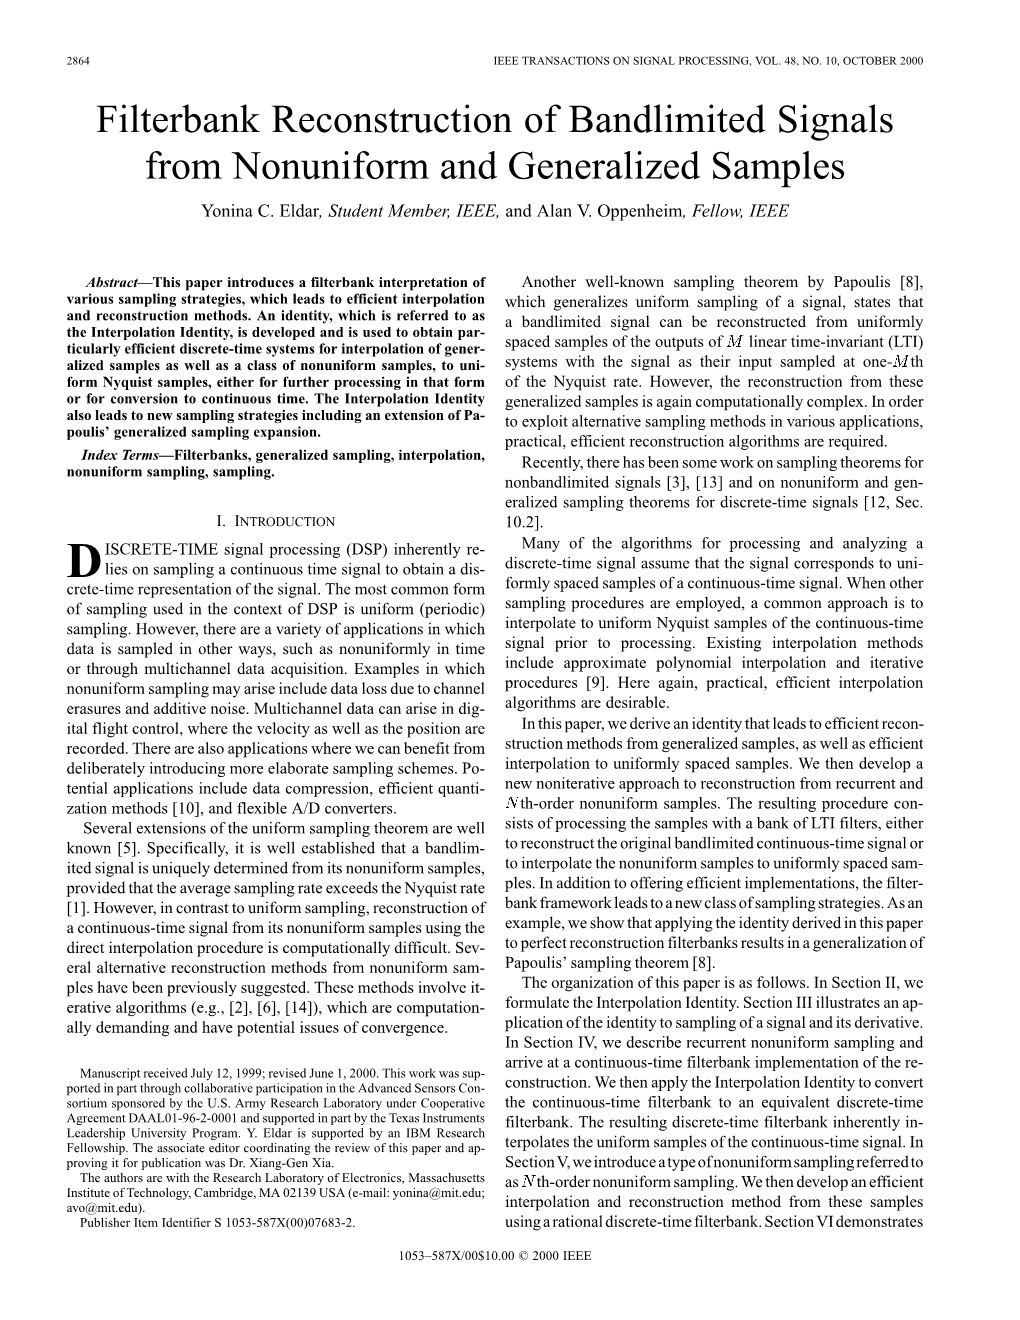 Filter Bank Reconstruction of Bandlimited Signals from Nonuniform and Generalized Samples